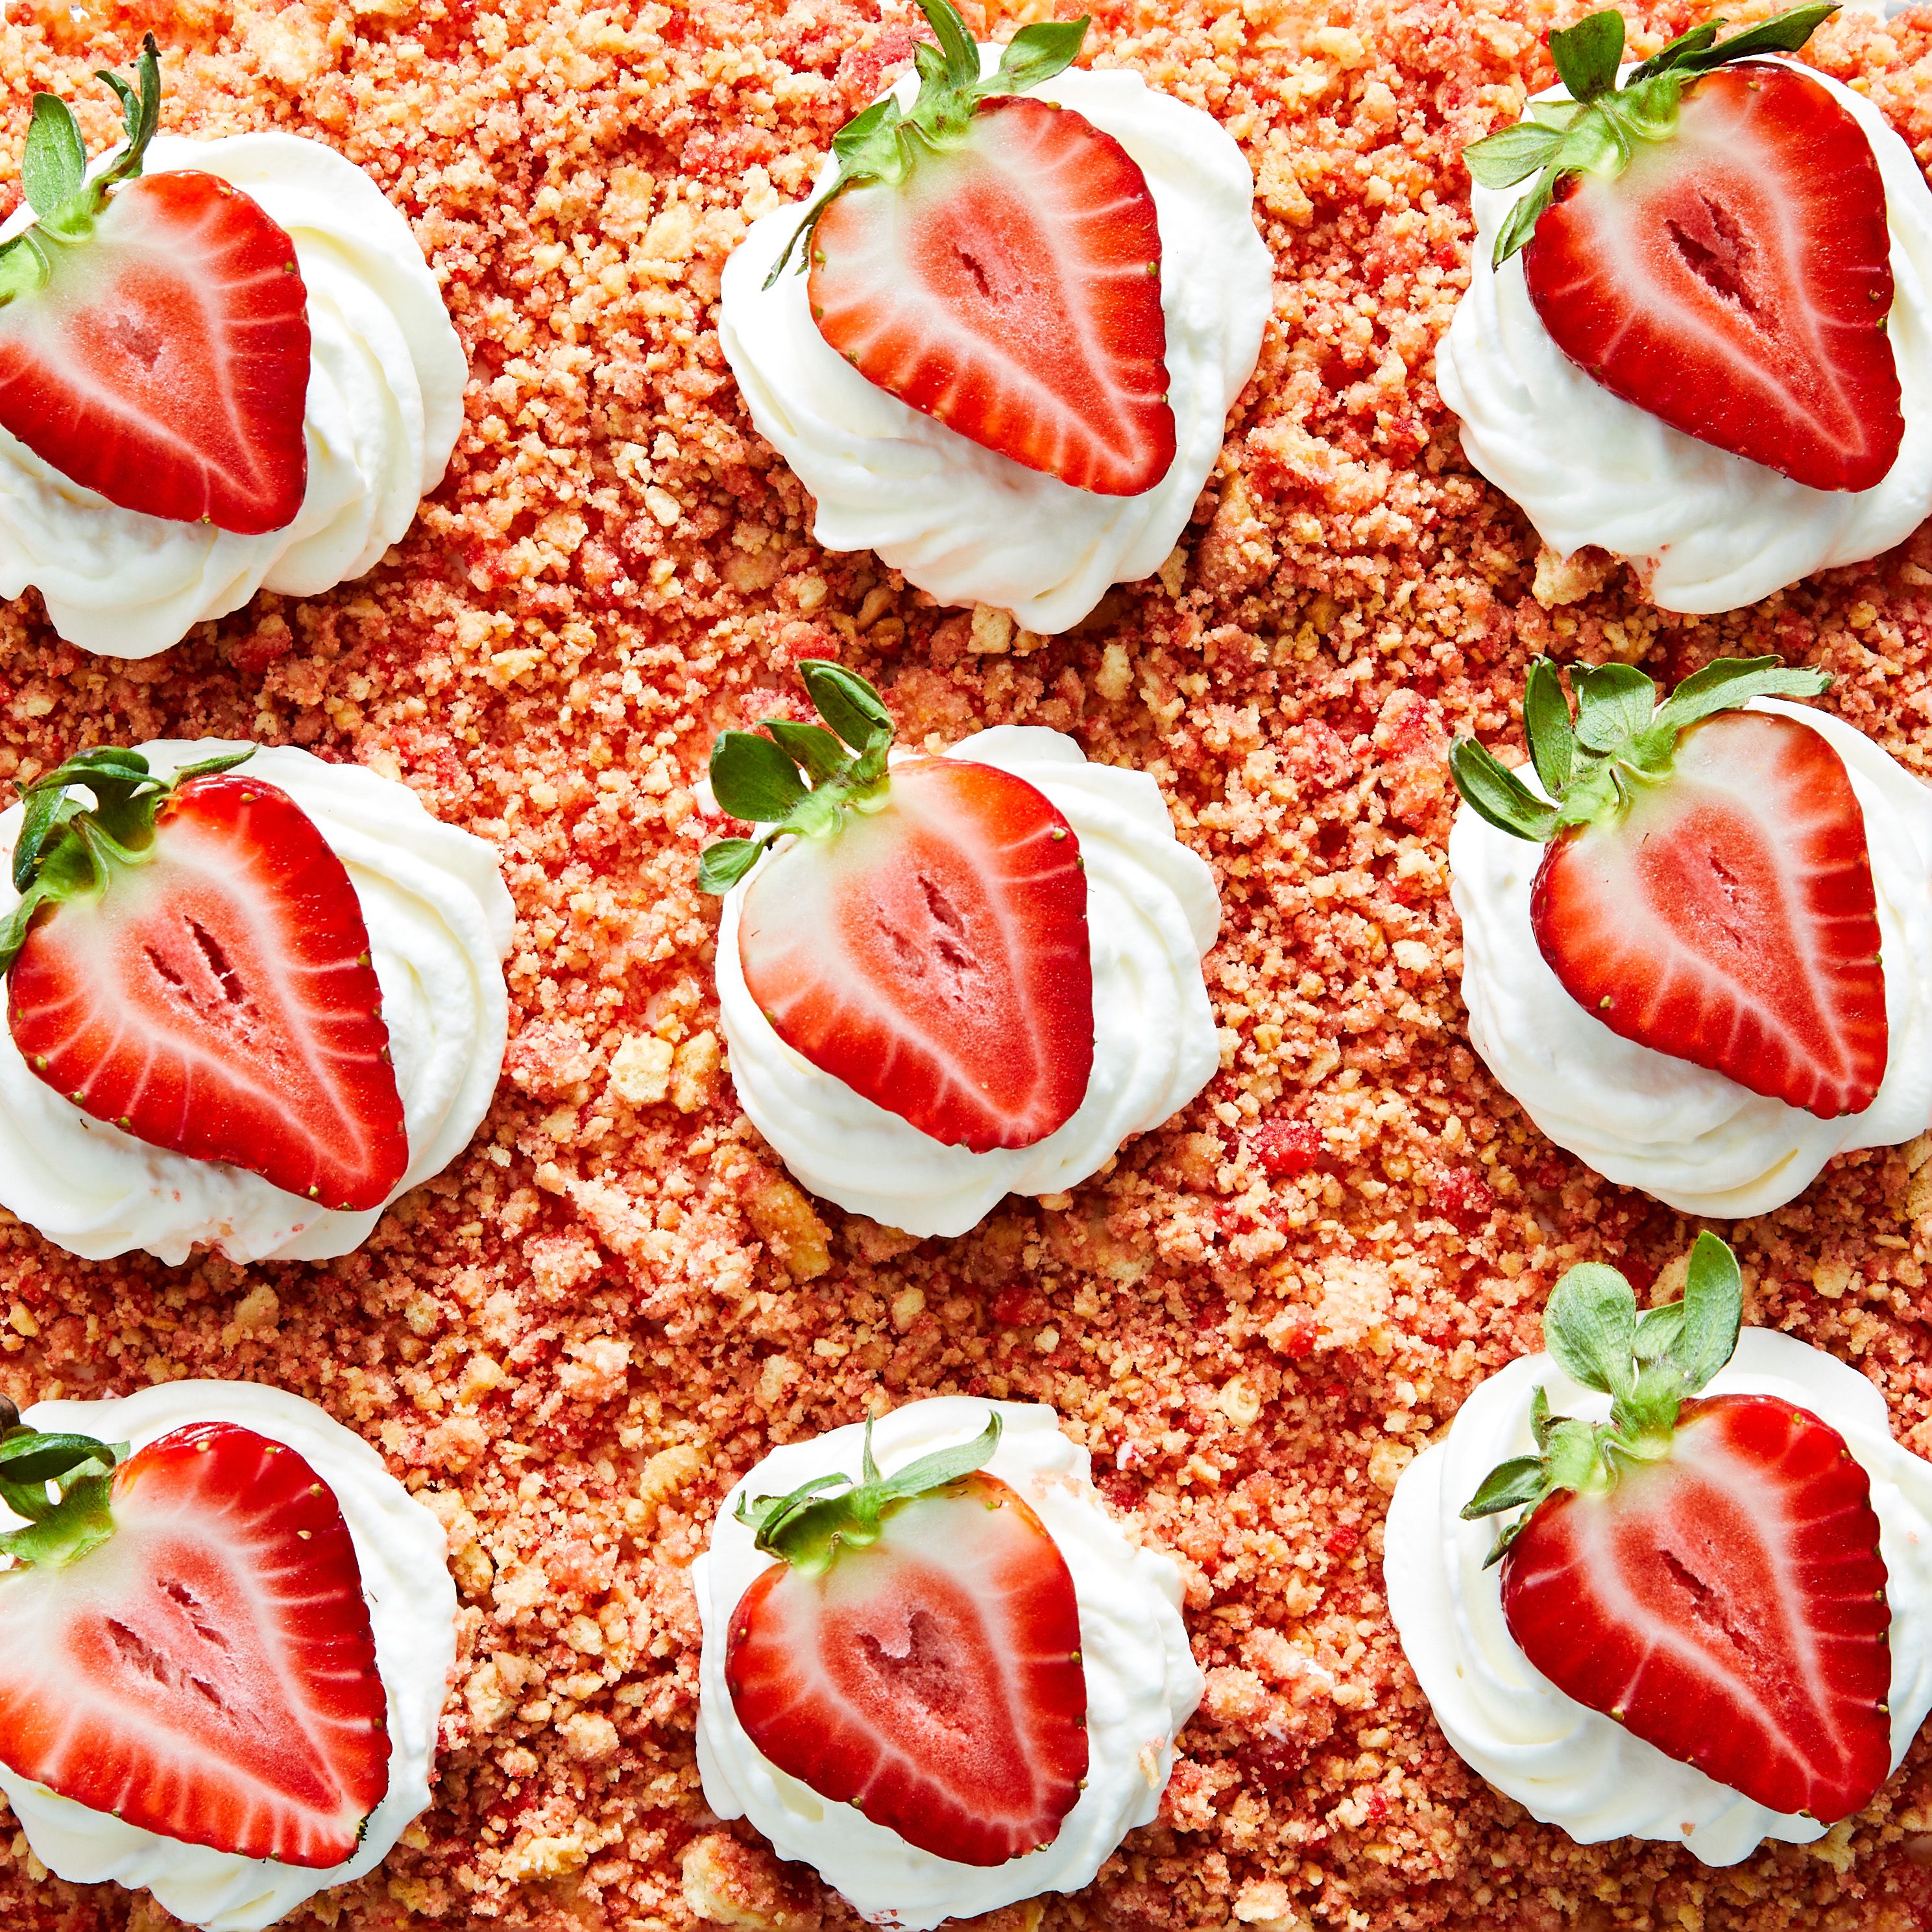 strawberry crunch cake topping